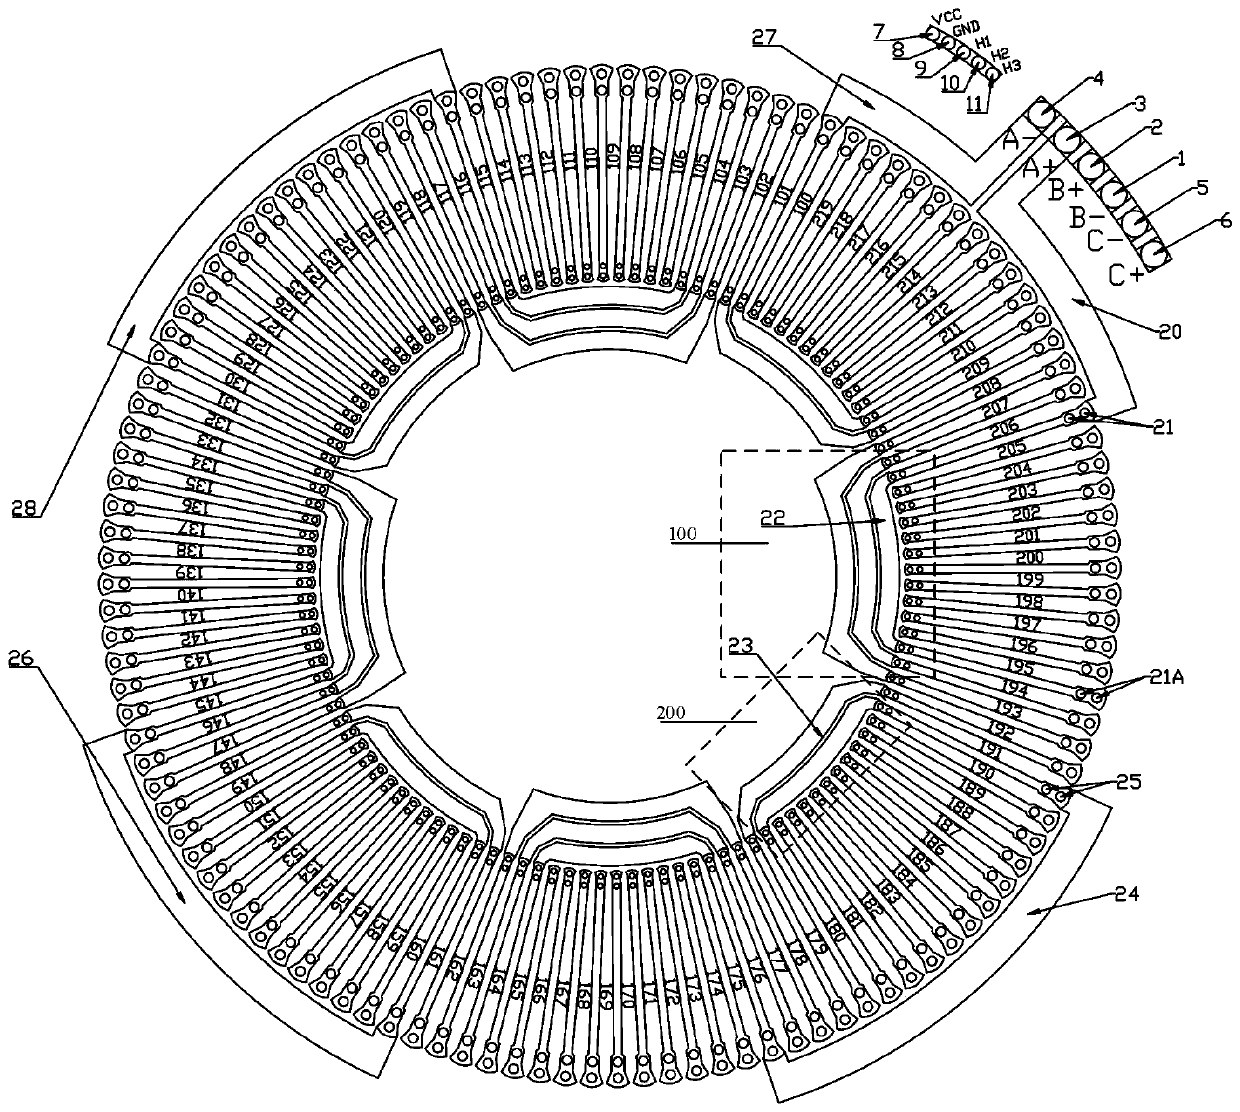 Stator structure based on disc type permanent-magnetism motor winding